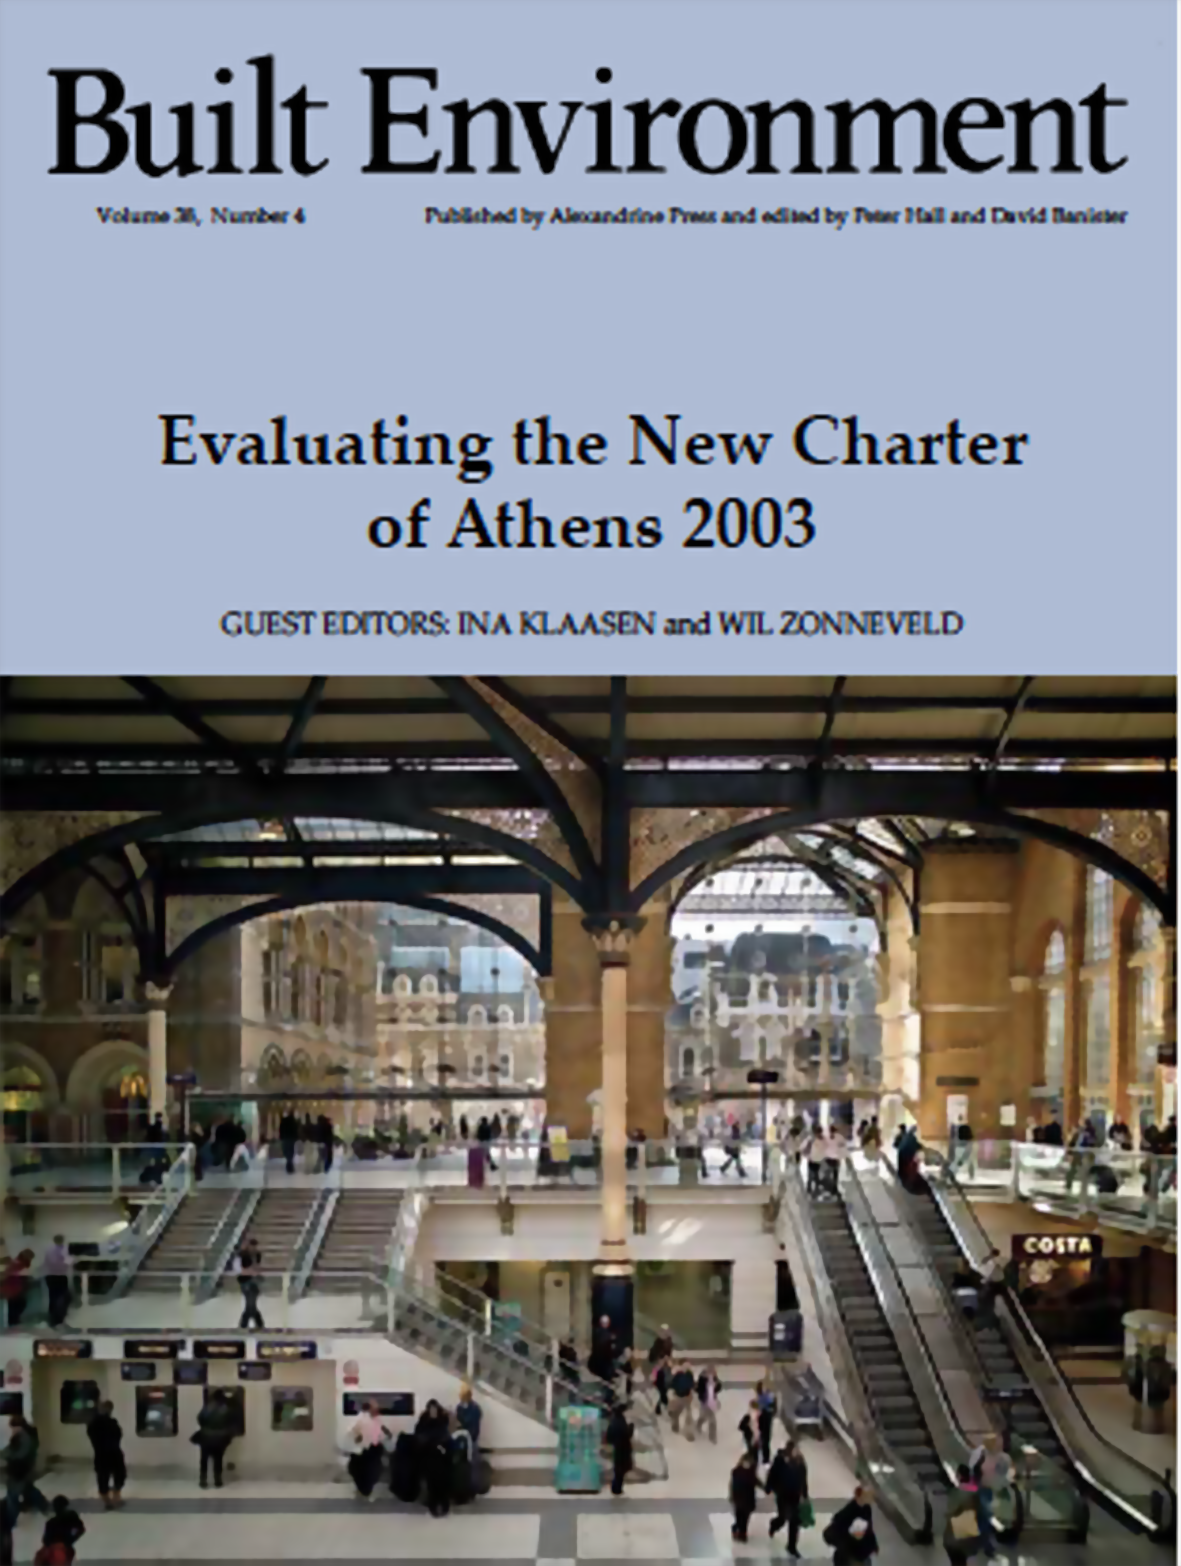 New issue of Built Environment: Evaluating the New Charter of Athens 2003